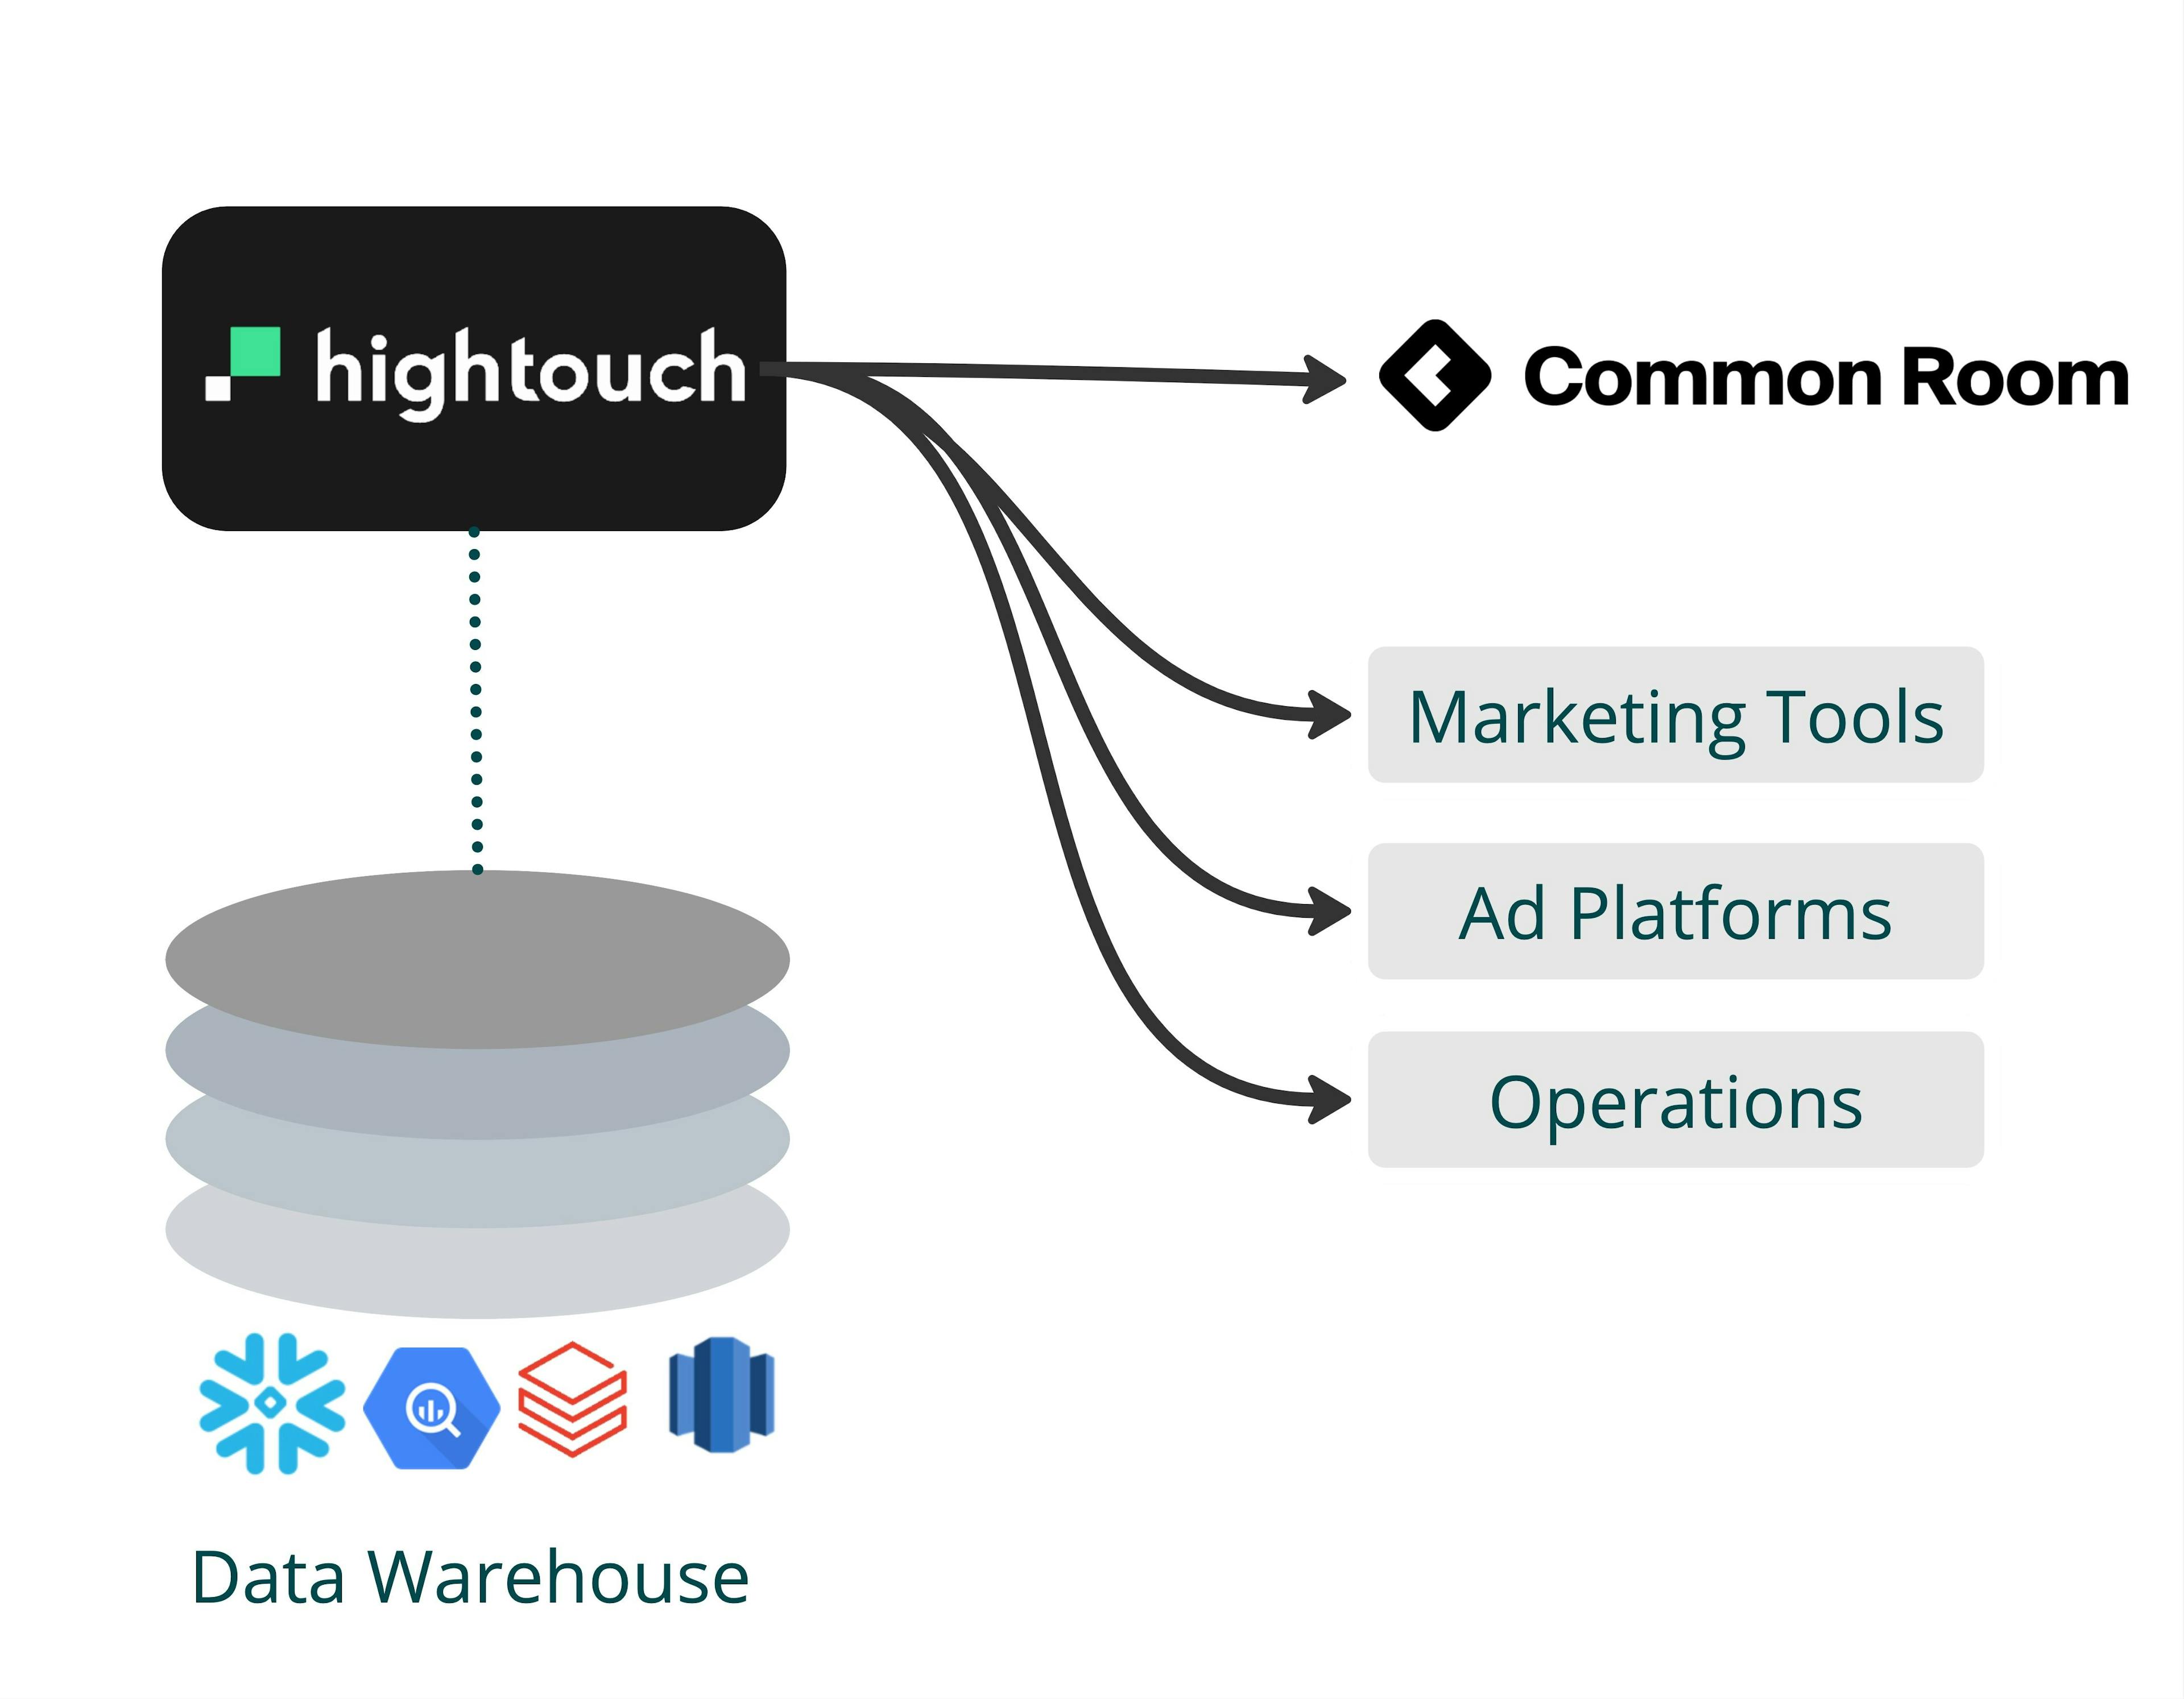 Sync data to Common Room from your data warehouse